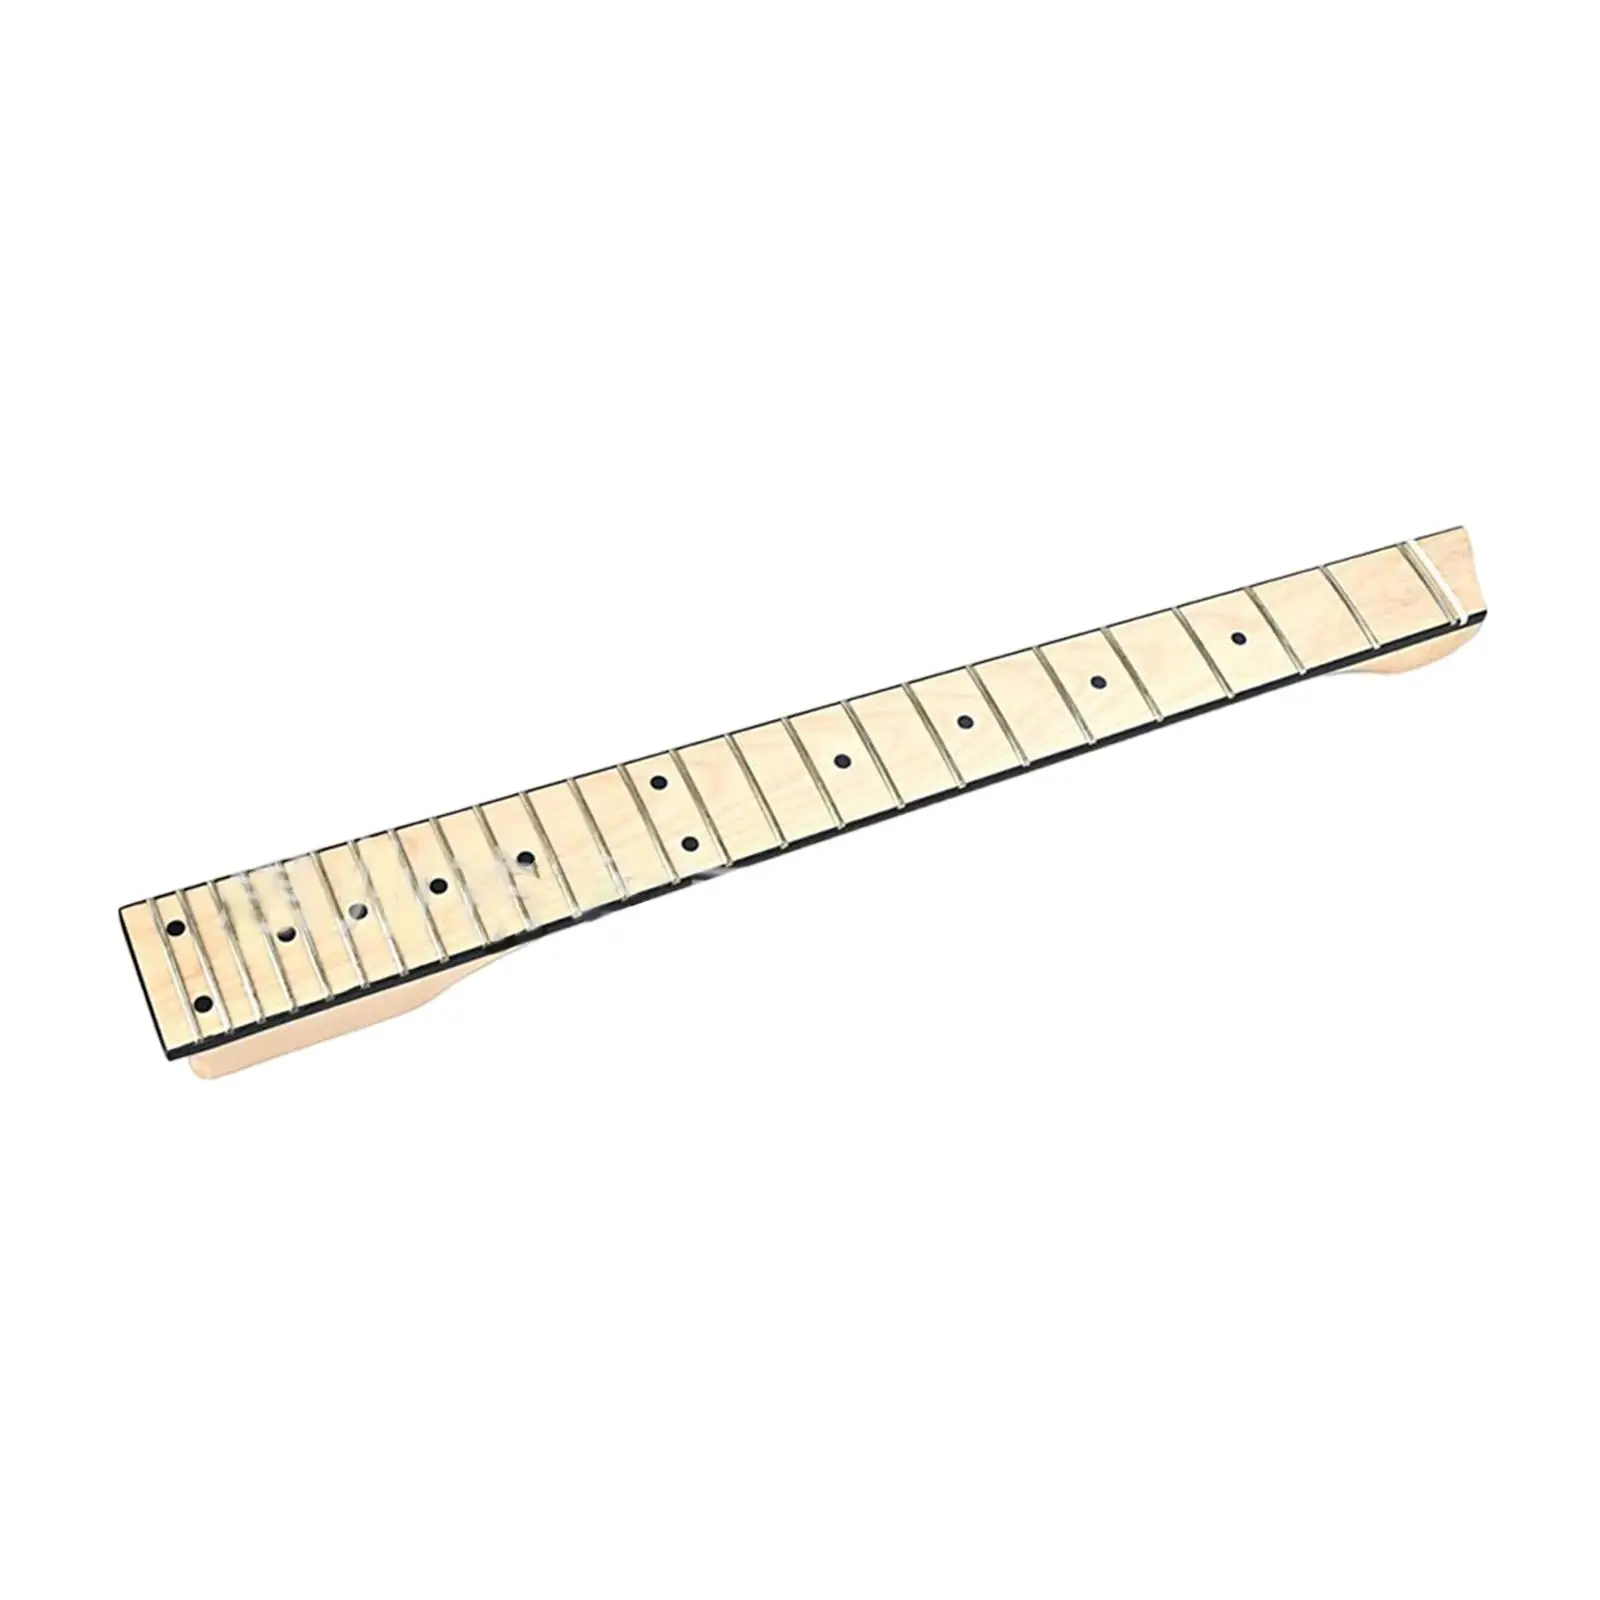 

Wood Electric Guitar Neck Sturdy Exquisite Guitar Body Repairing Accessories Maple Neck for Music Lover Bass Luthier DIY